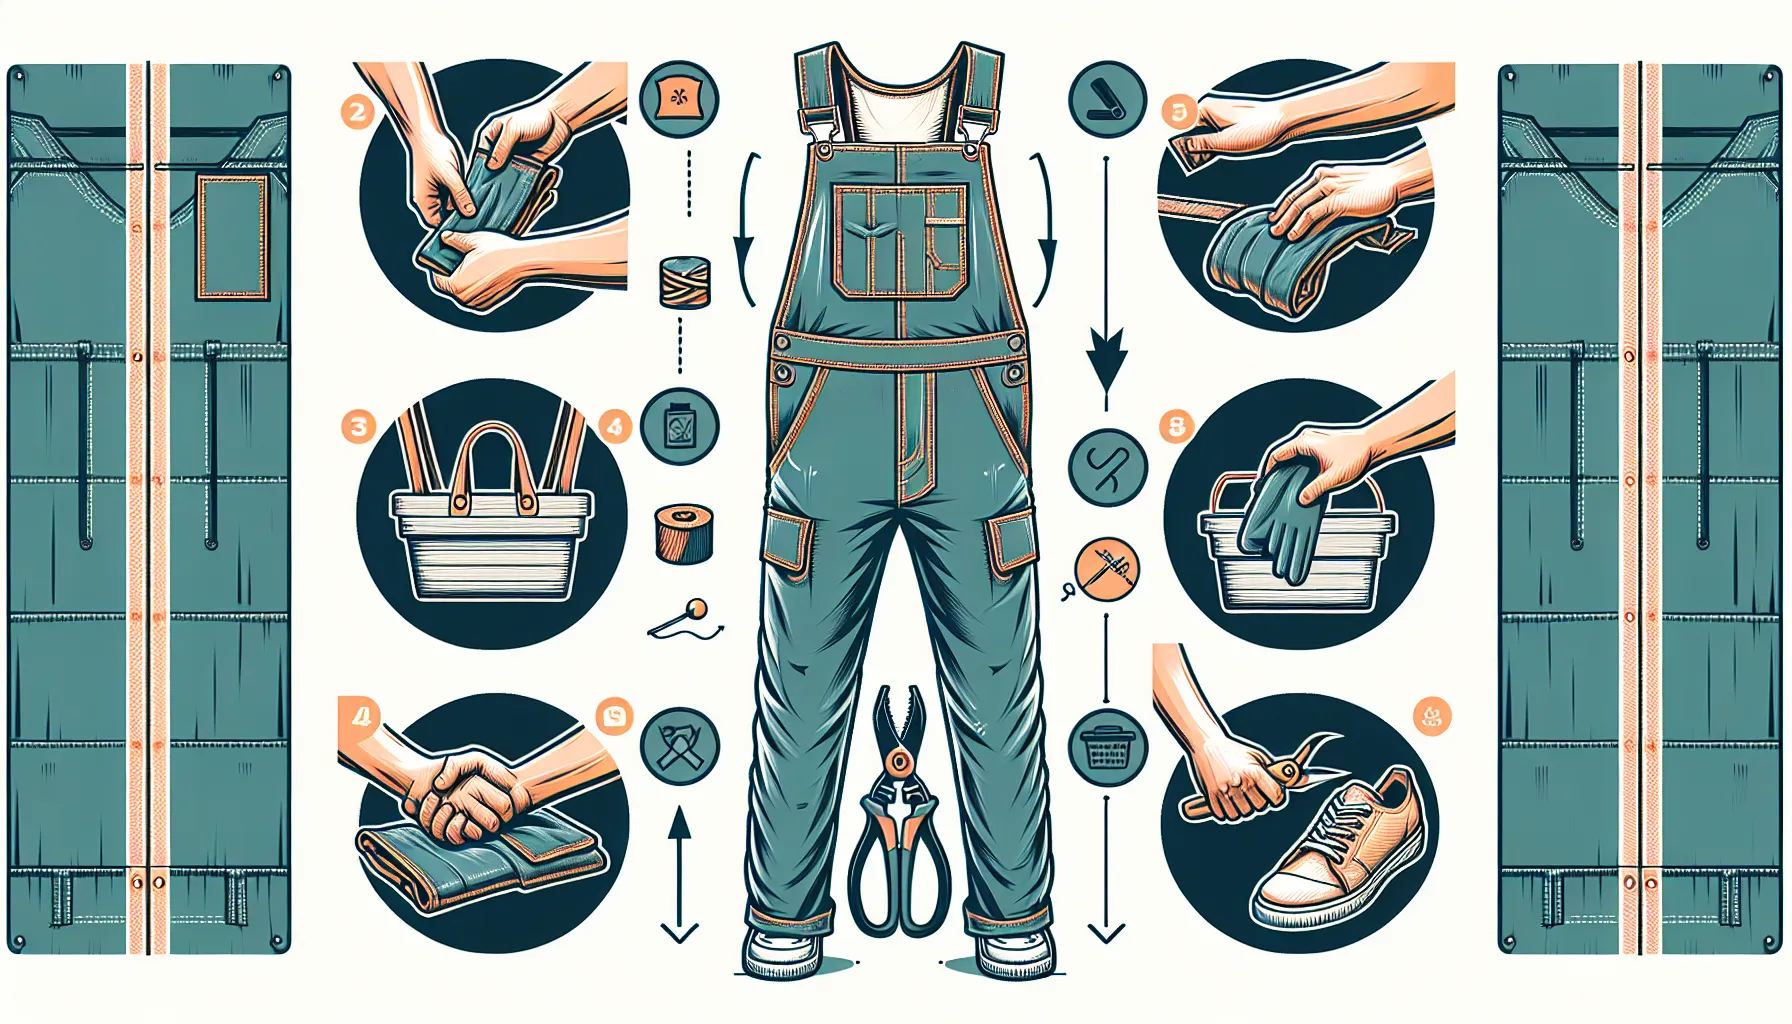 An illustrated diagram showing the various features and accessories associated with a pair of gardening overalls.